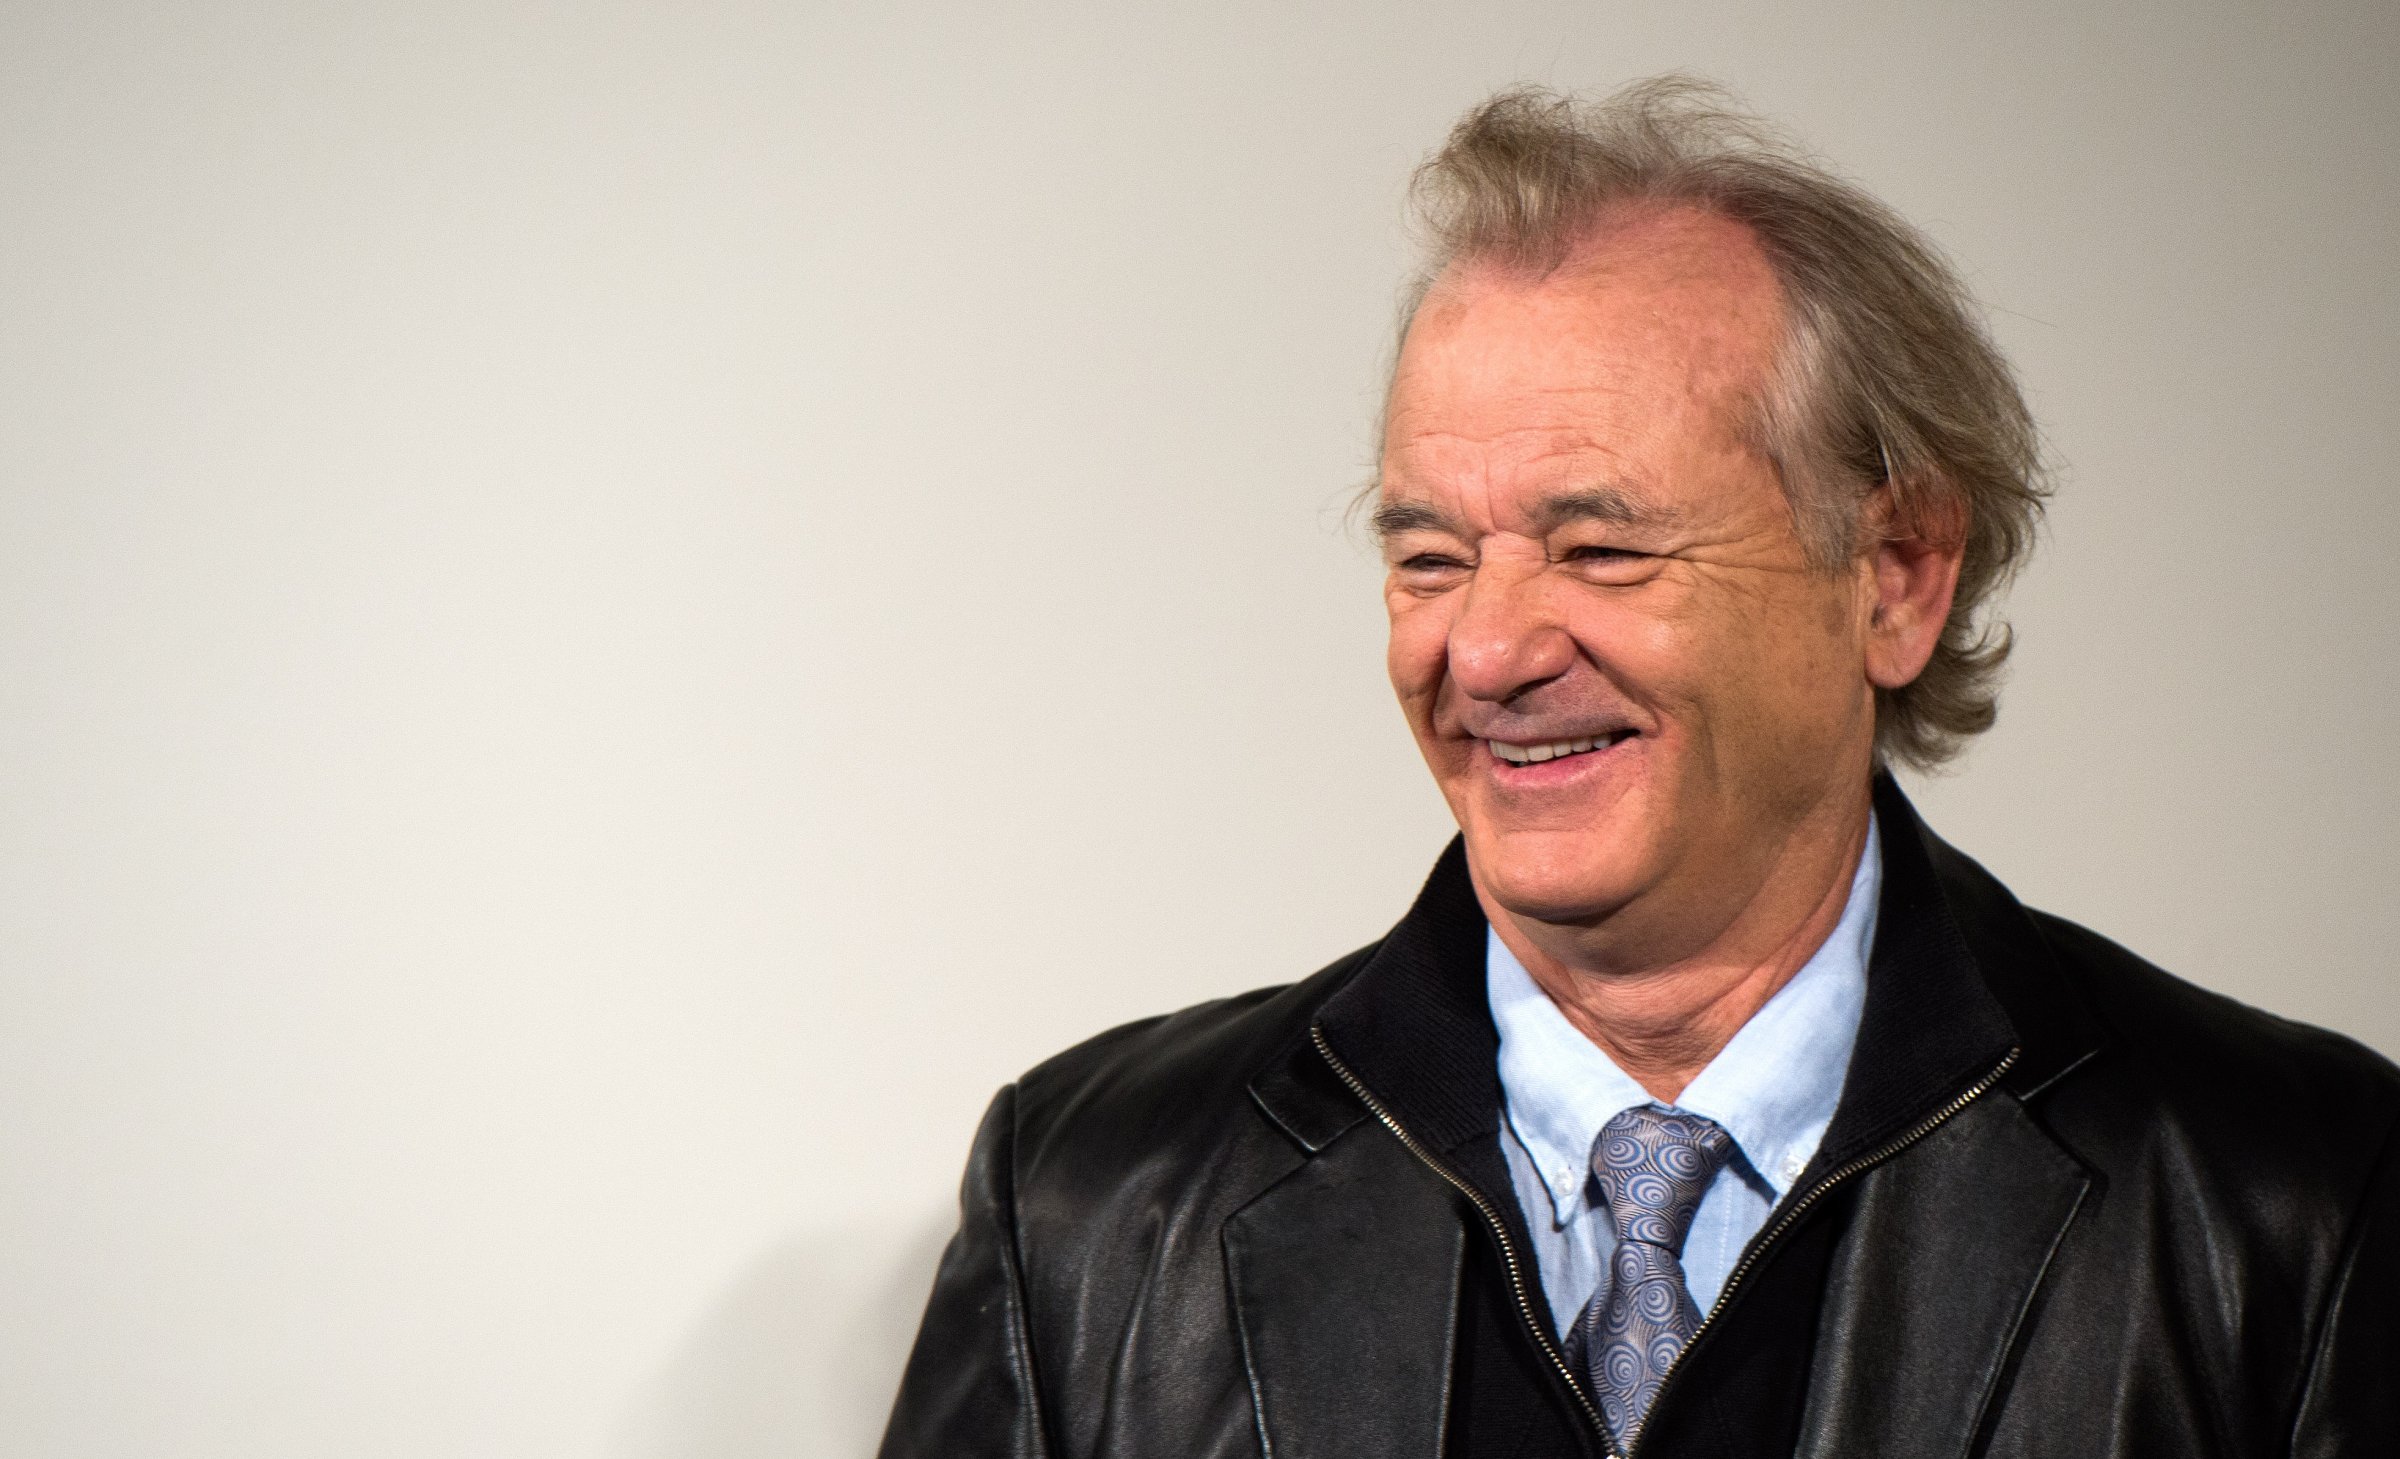 Bill Murray attends "The Monuments Men" photocall at the National Gallery on Feb. 11, 2014 in London.